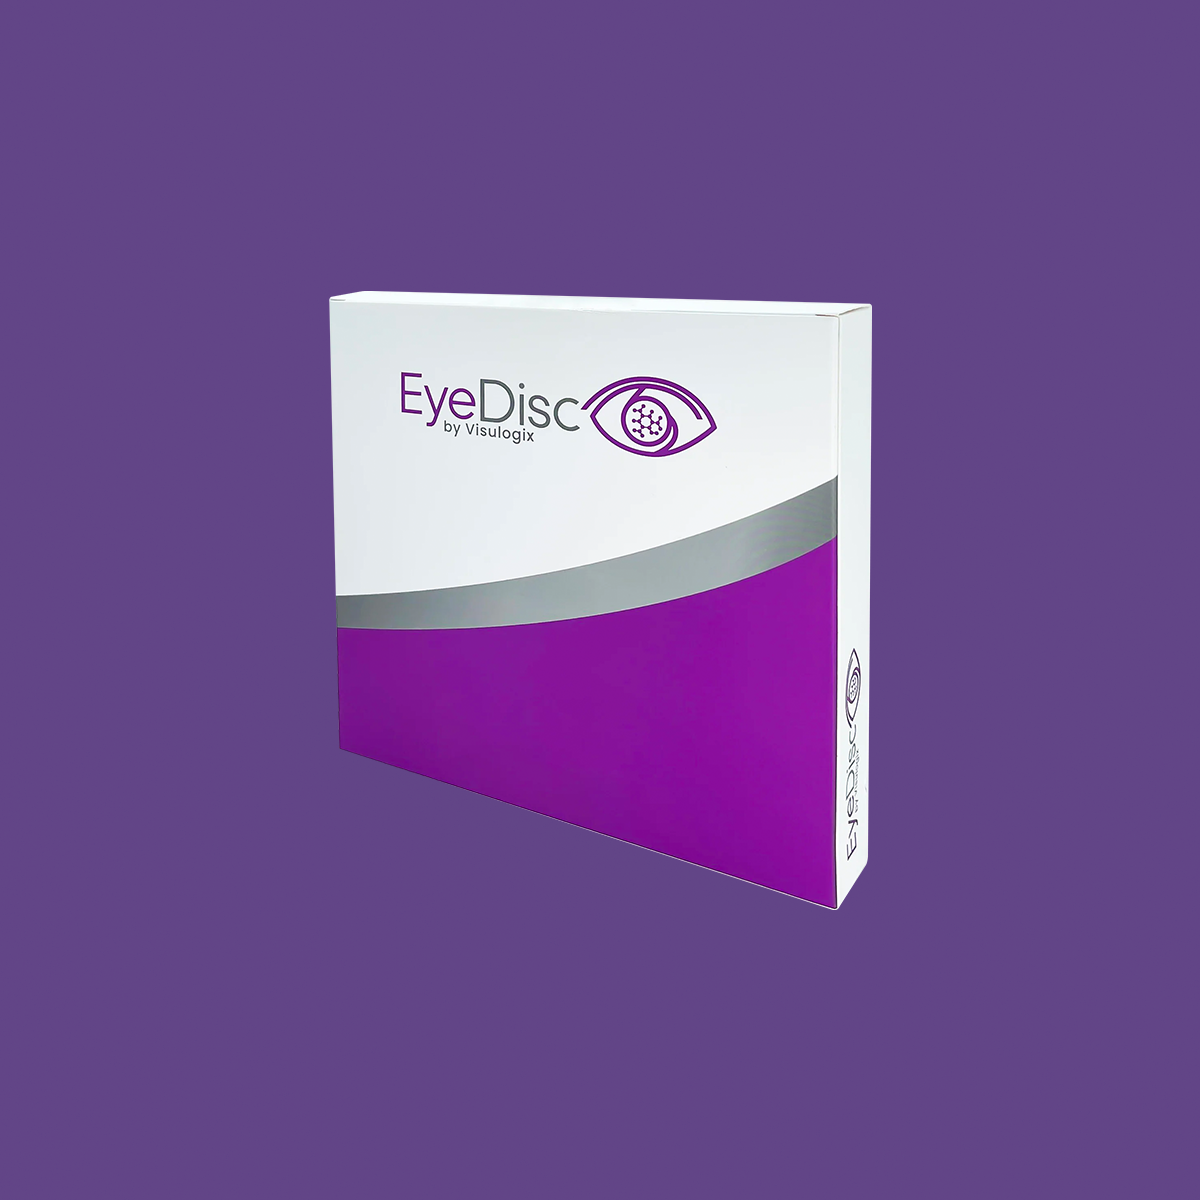 Eye Disc Amniotic Dehydrated, Bi-directional, Membrane by Visulogix (Multiple Sizes)